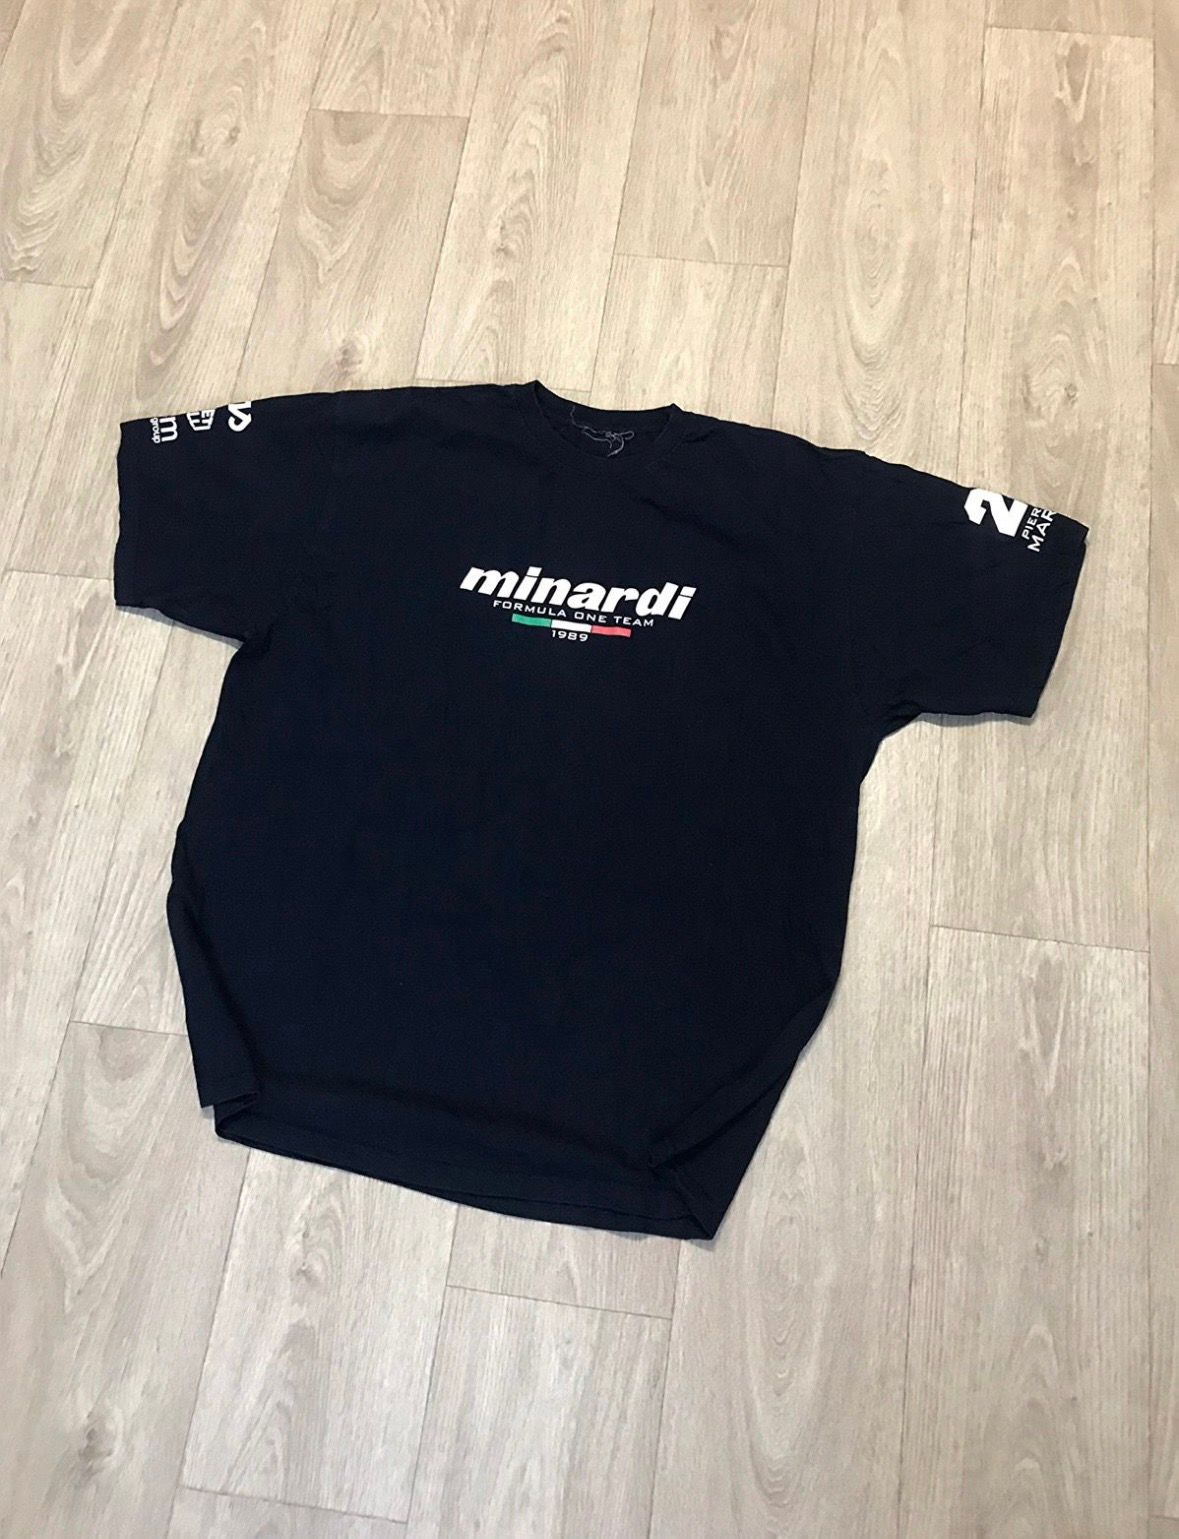 Pre-owned Formula Uno X Racing Vintage Minardi Formula One T-shirt In Navy